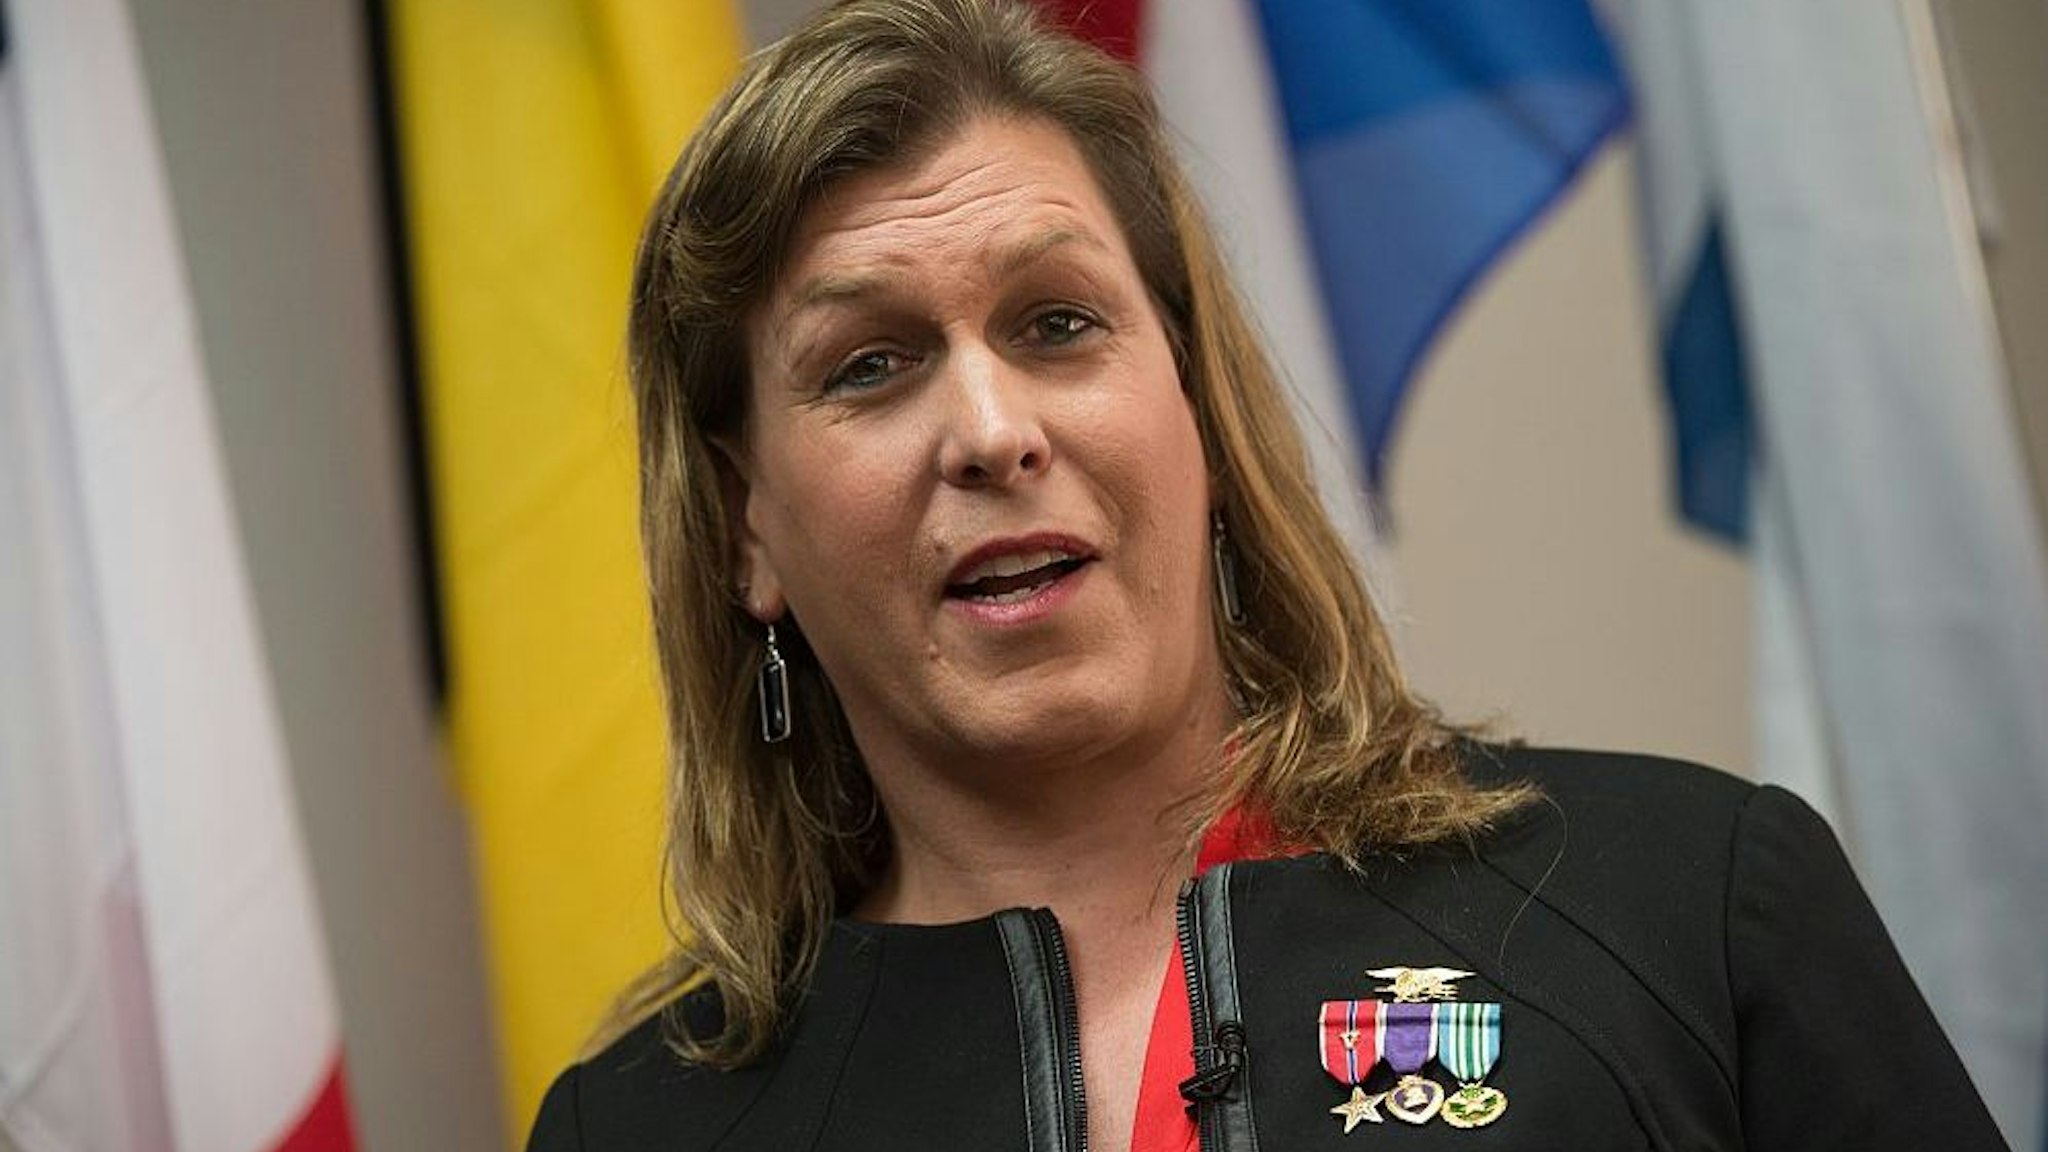 Transgender former US Navy Seal Senior Chief Kristin Beck speaks during a conference entitled "Perspectives on Transgender Military Service from Around the Globe" organized by the American Civil Liberties Union (ACLU) and the Palm Center in Washington on October 20, 2014.